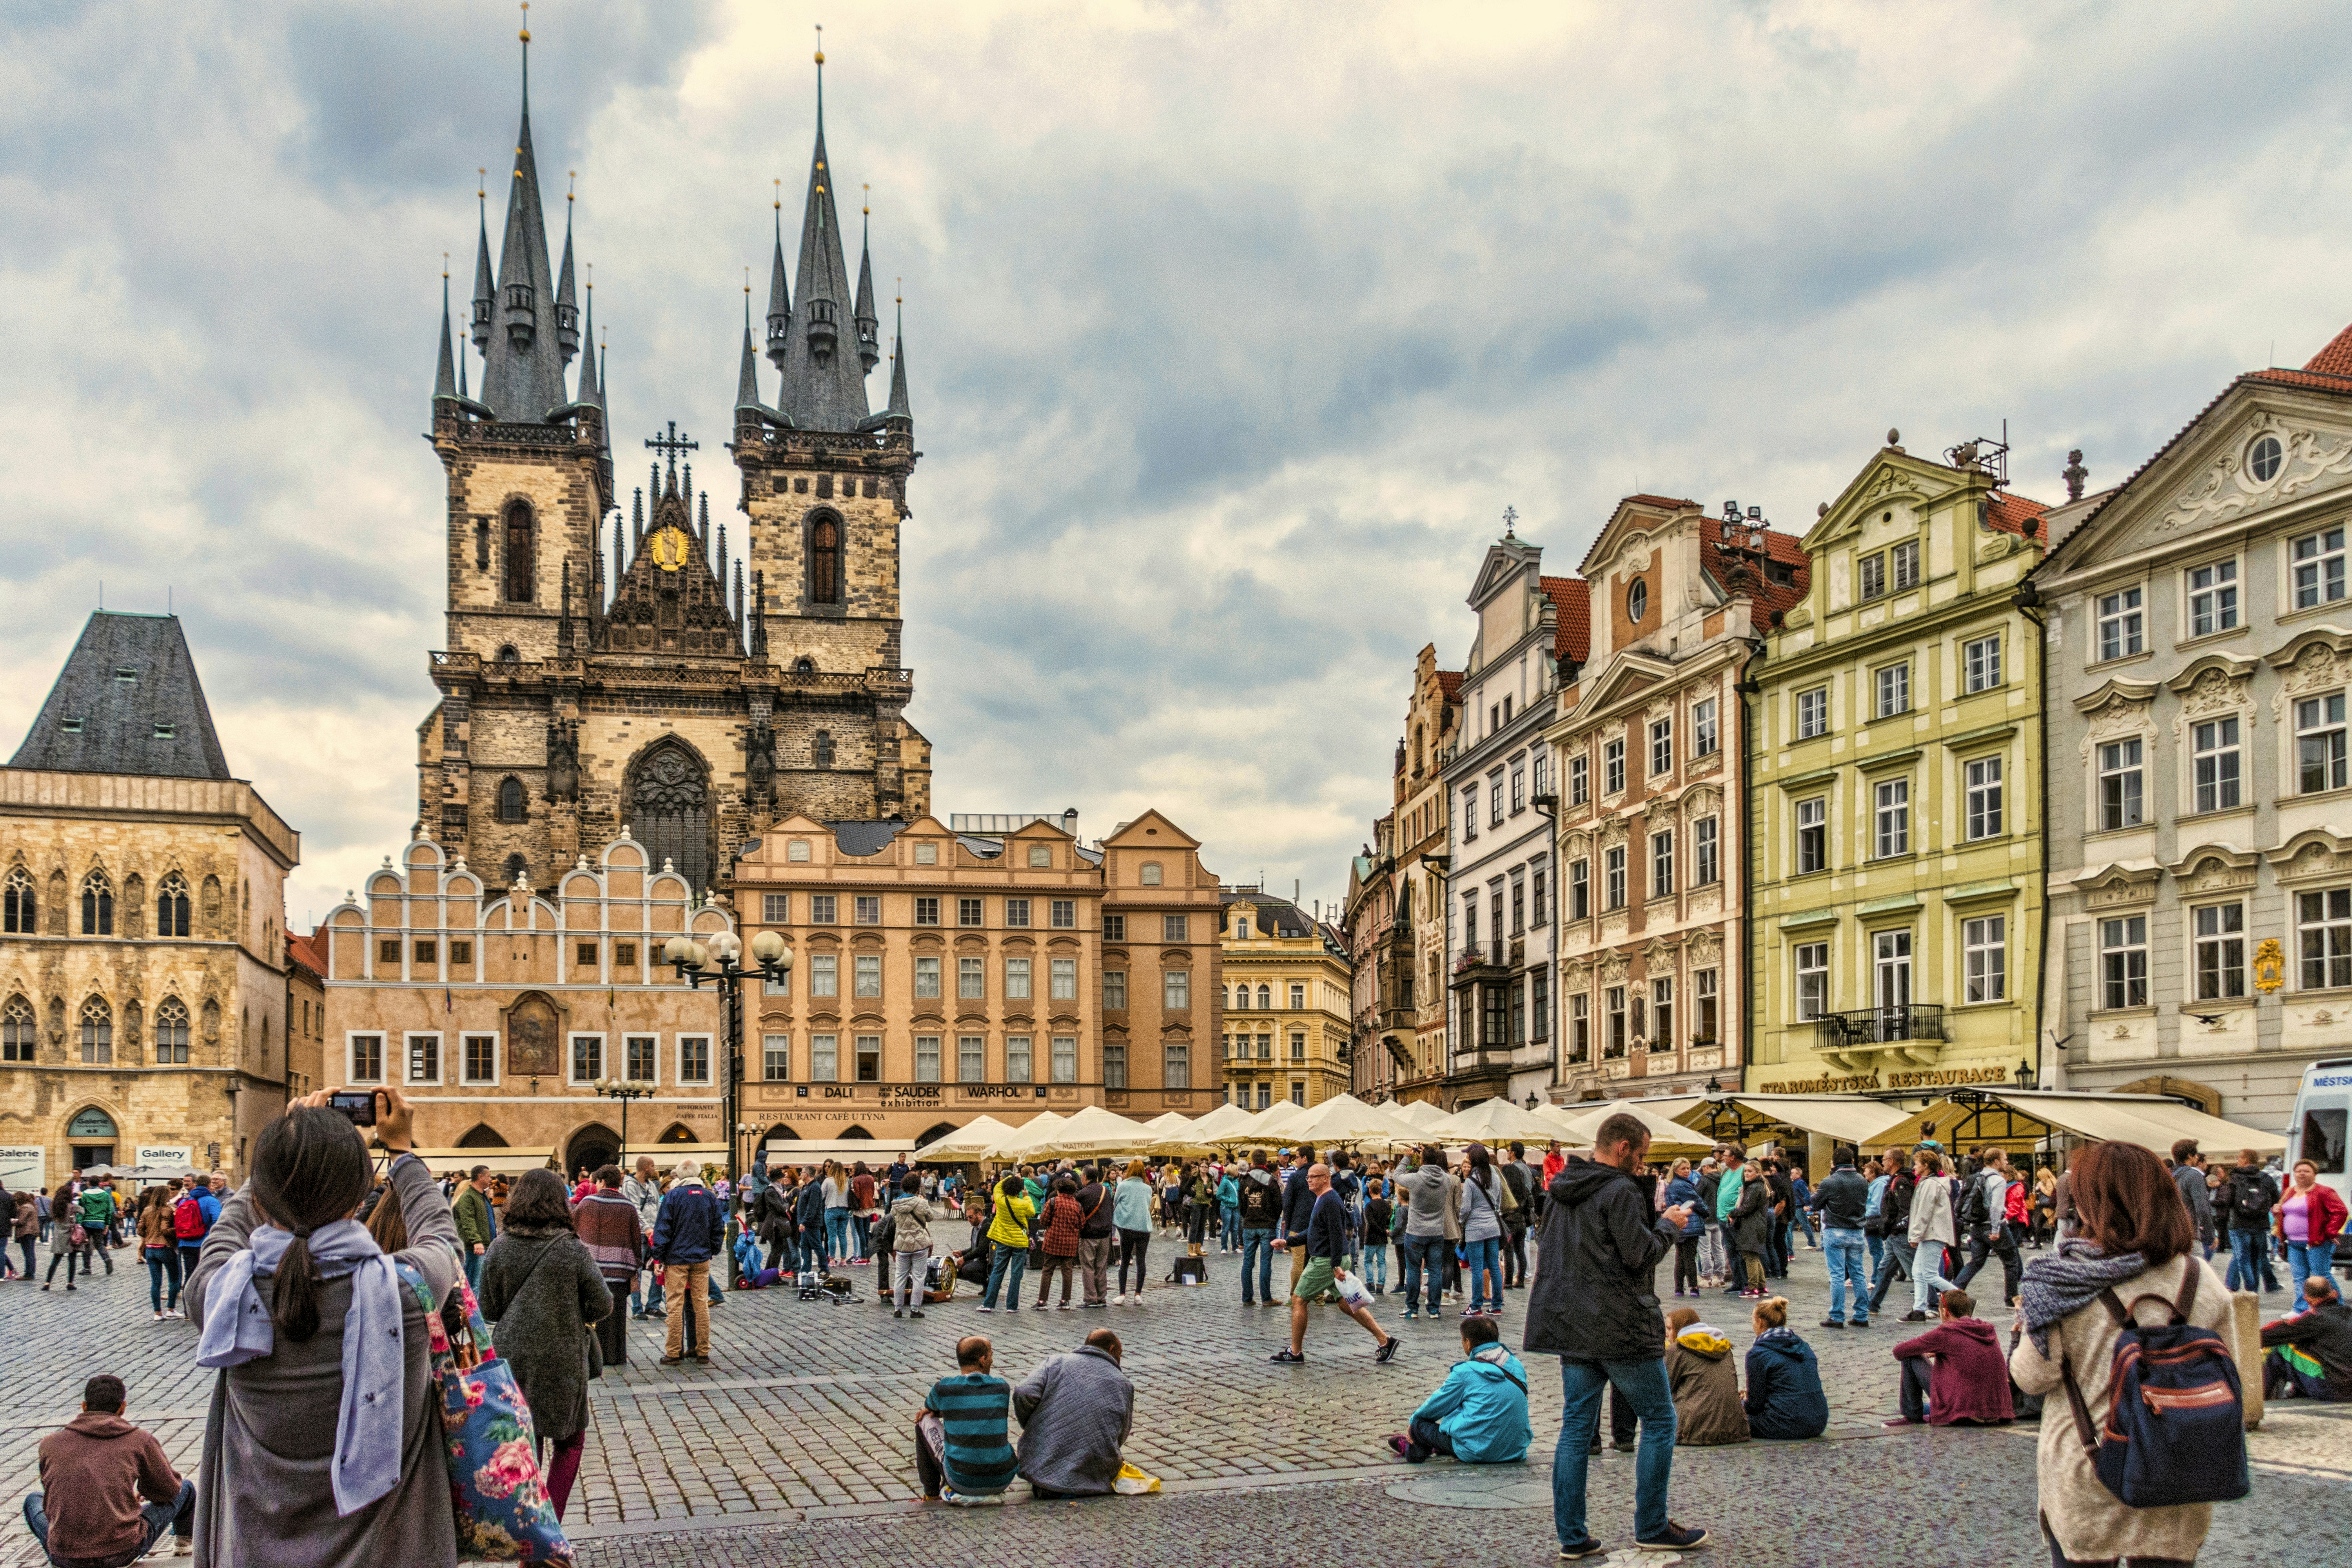 Tourists wander the old square of central Prague, dominated by a twin-spired church